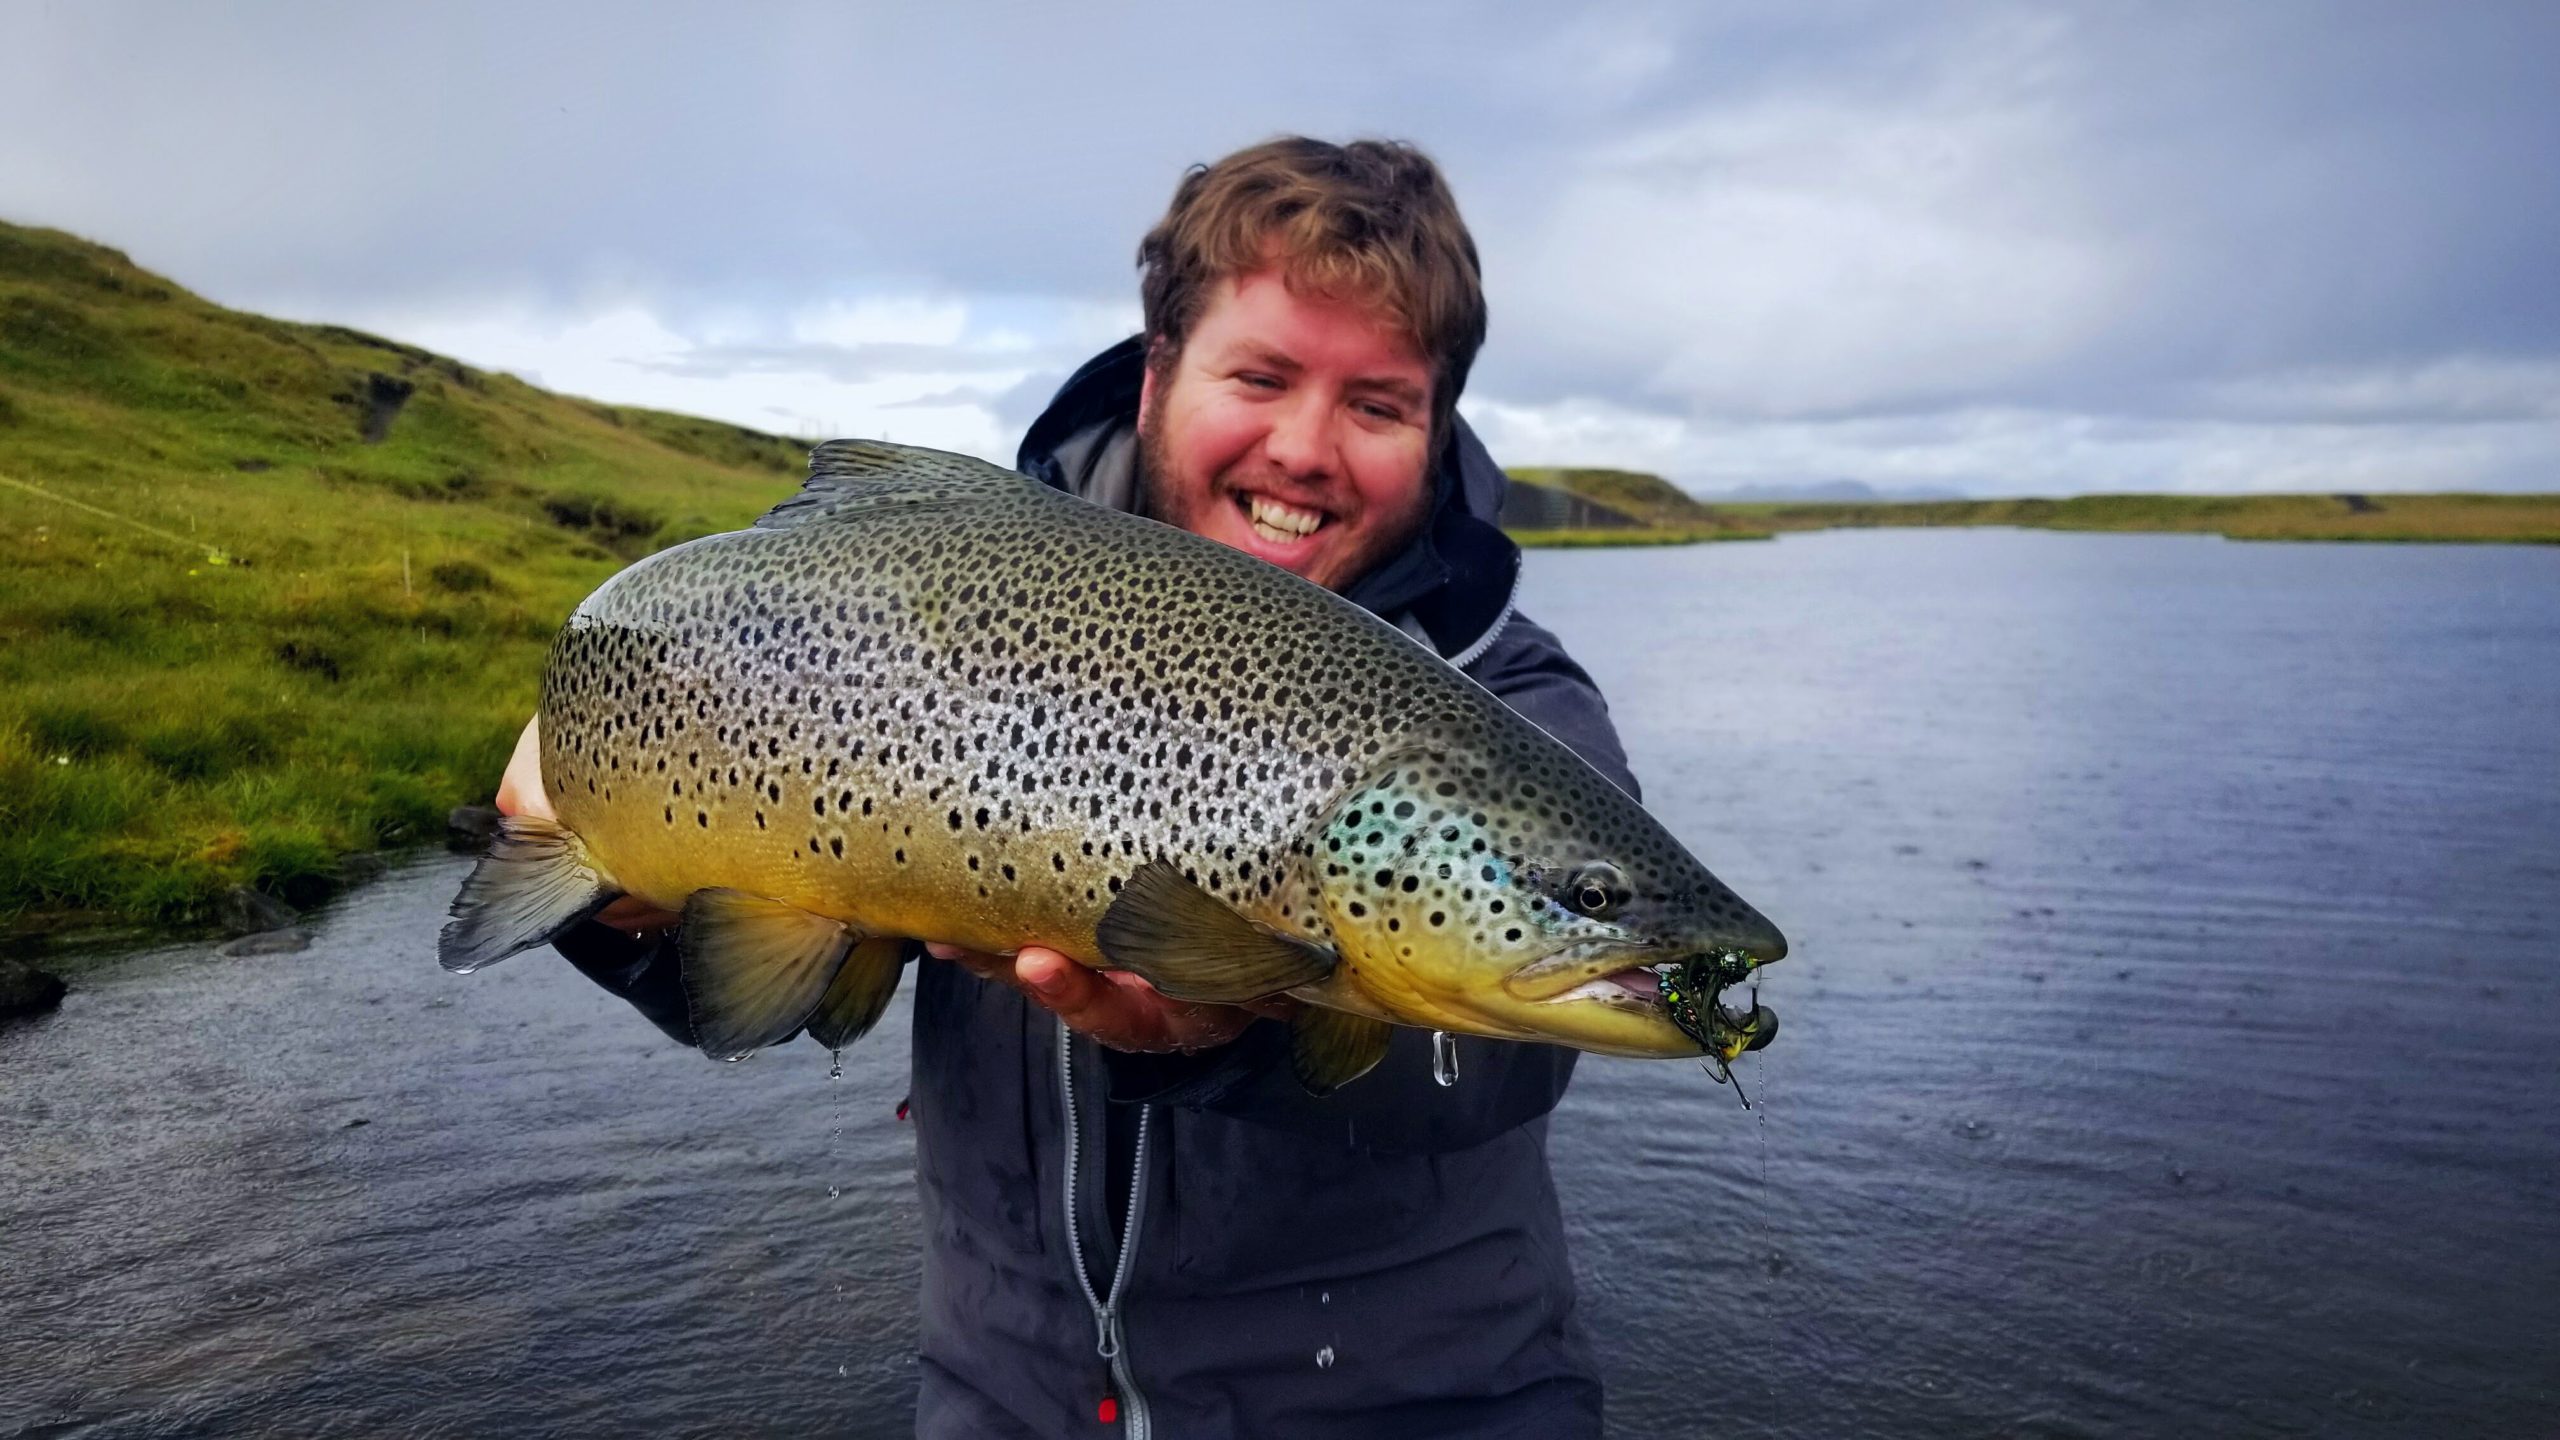 Fisheries of the Central Coast & Iceland with Dagur Guðmundsson